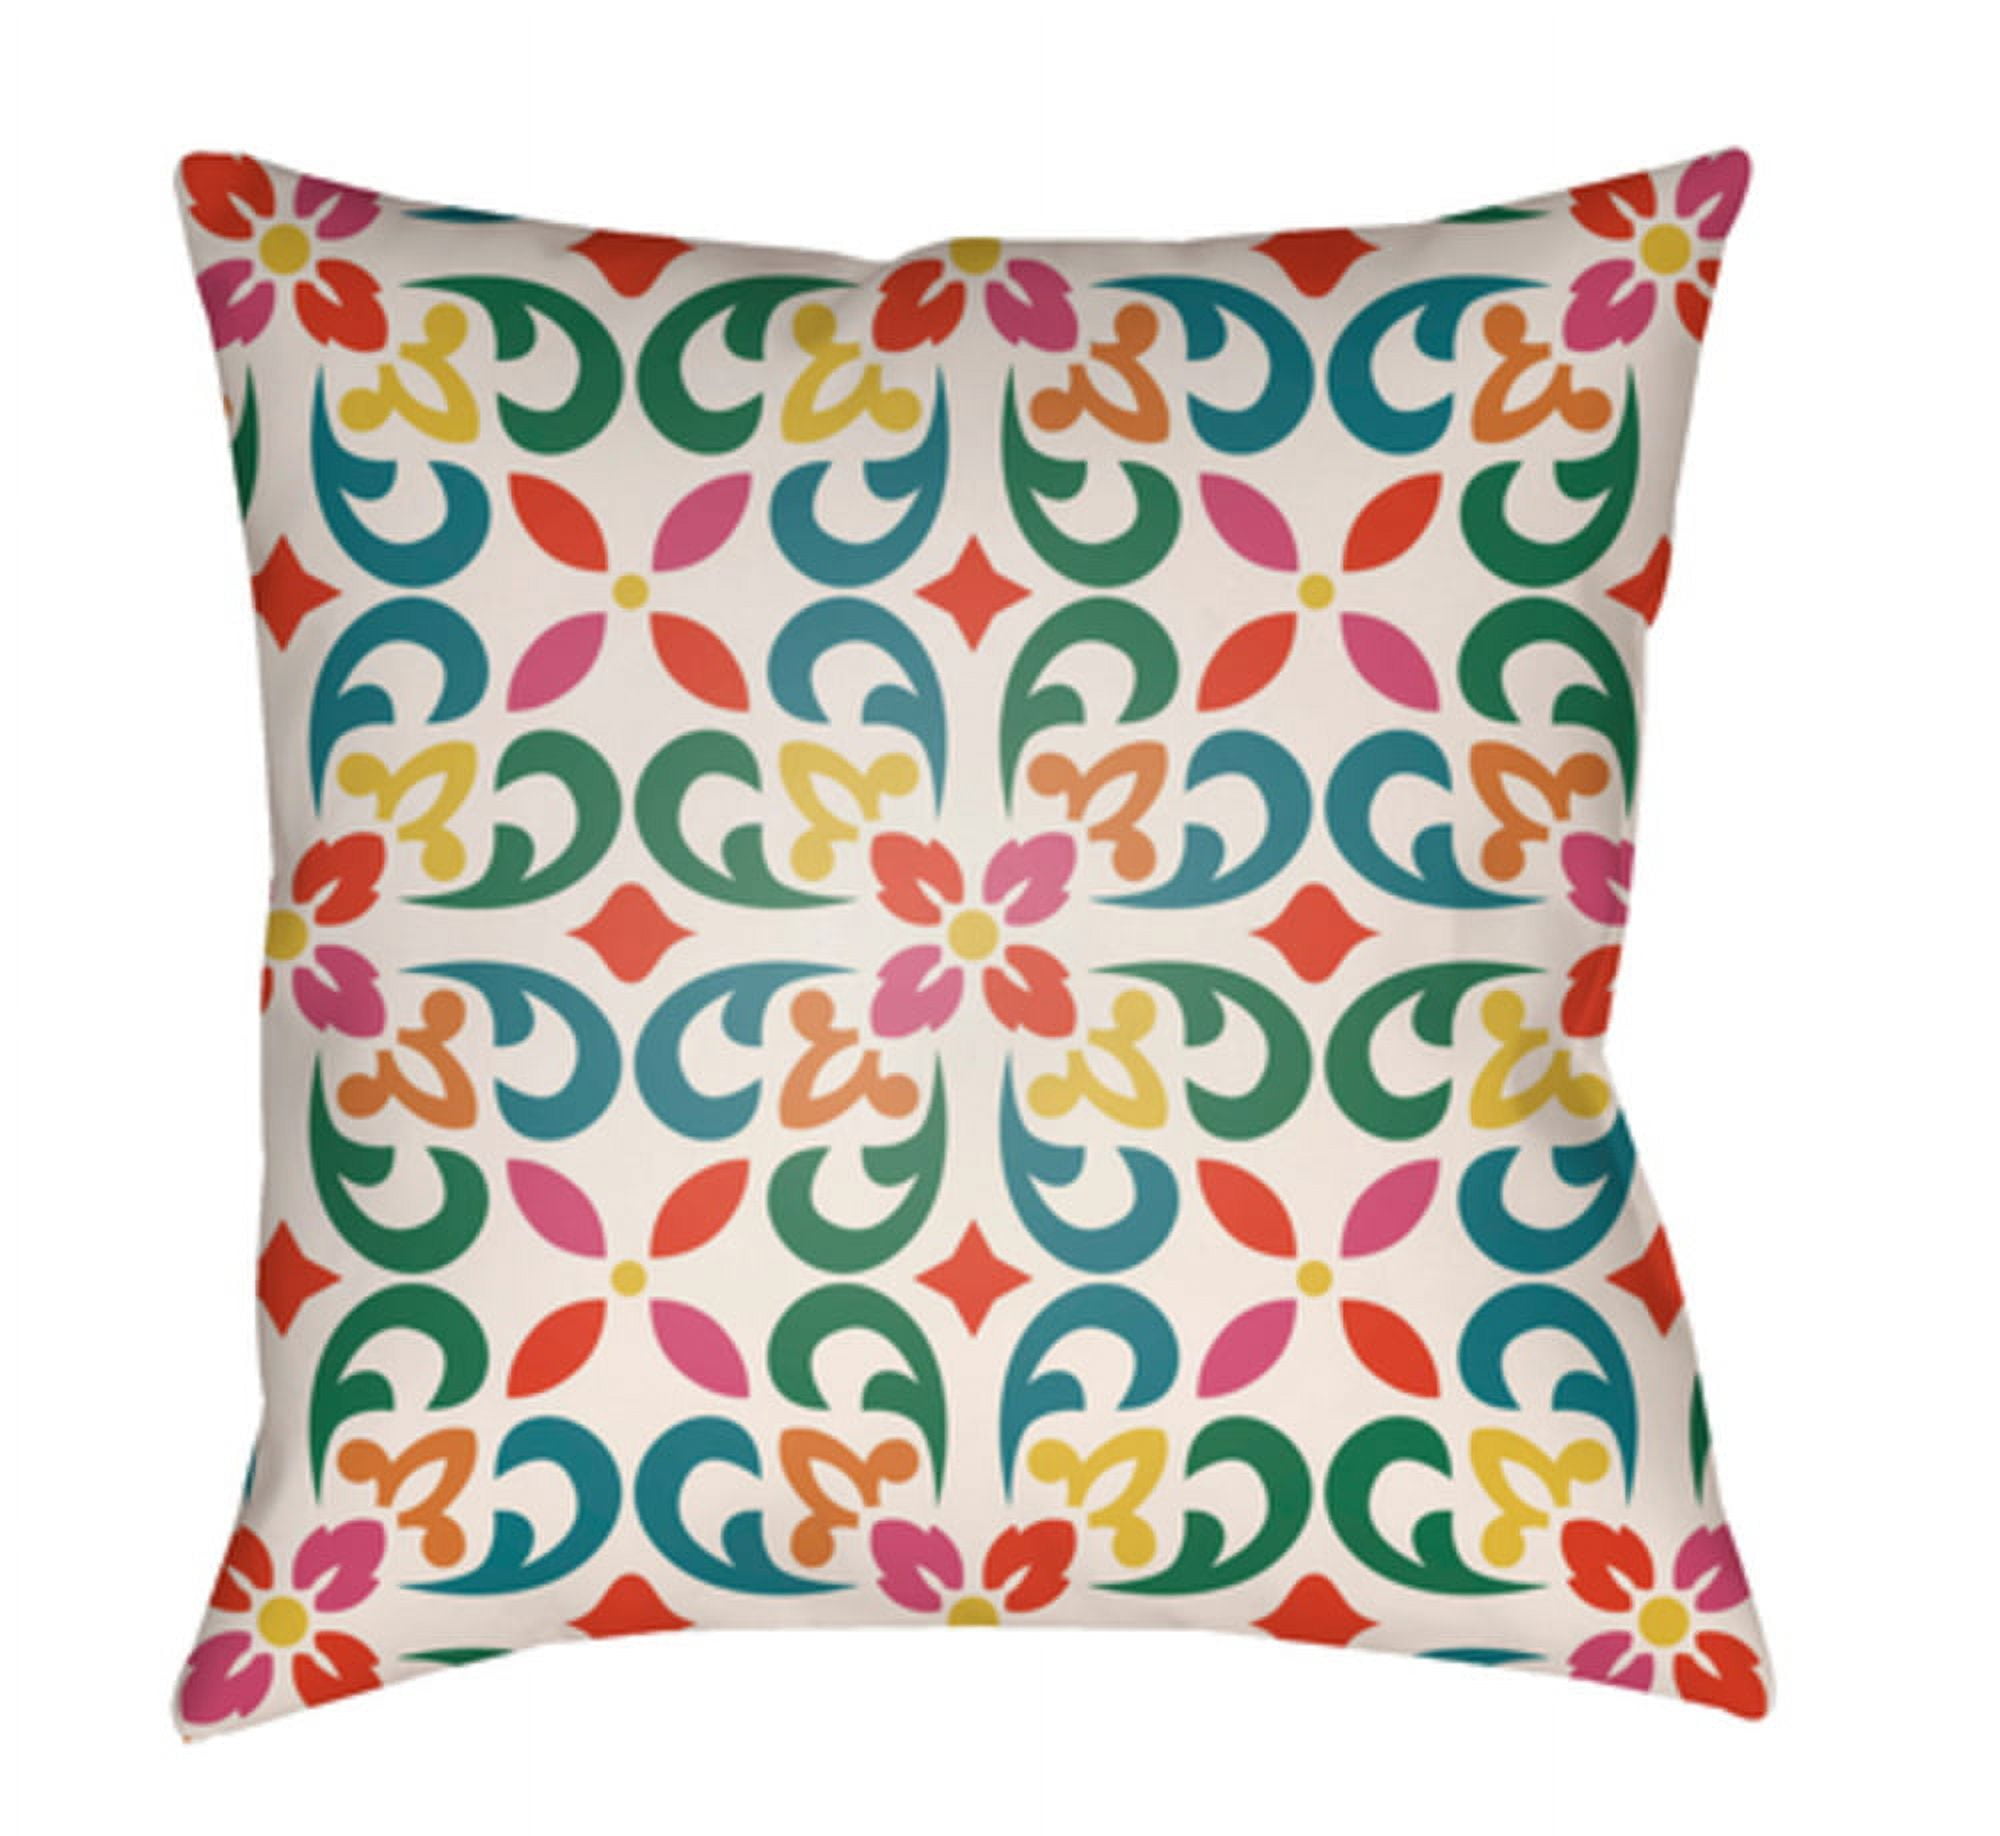 Picture of Artistic Weavers LOTA1309-2626 Lolita Square Pillow, Poppy Red & Teal - 26 x 26 in.